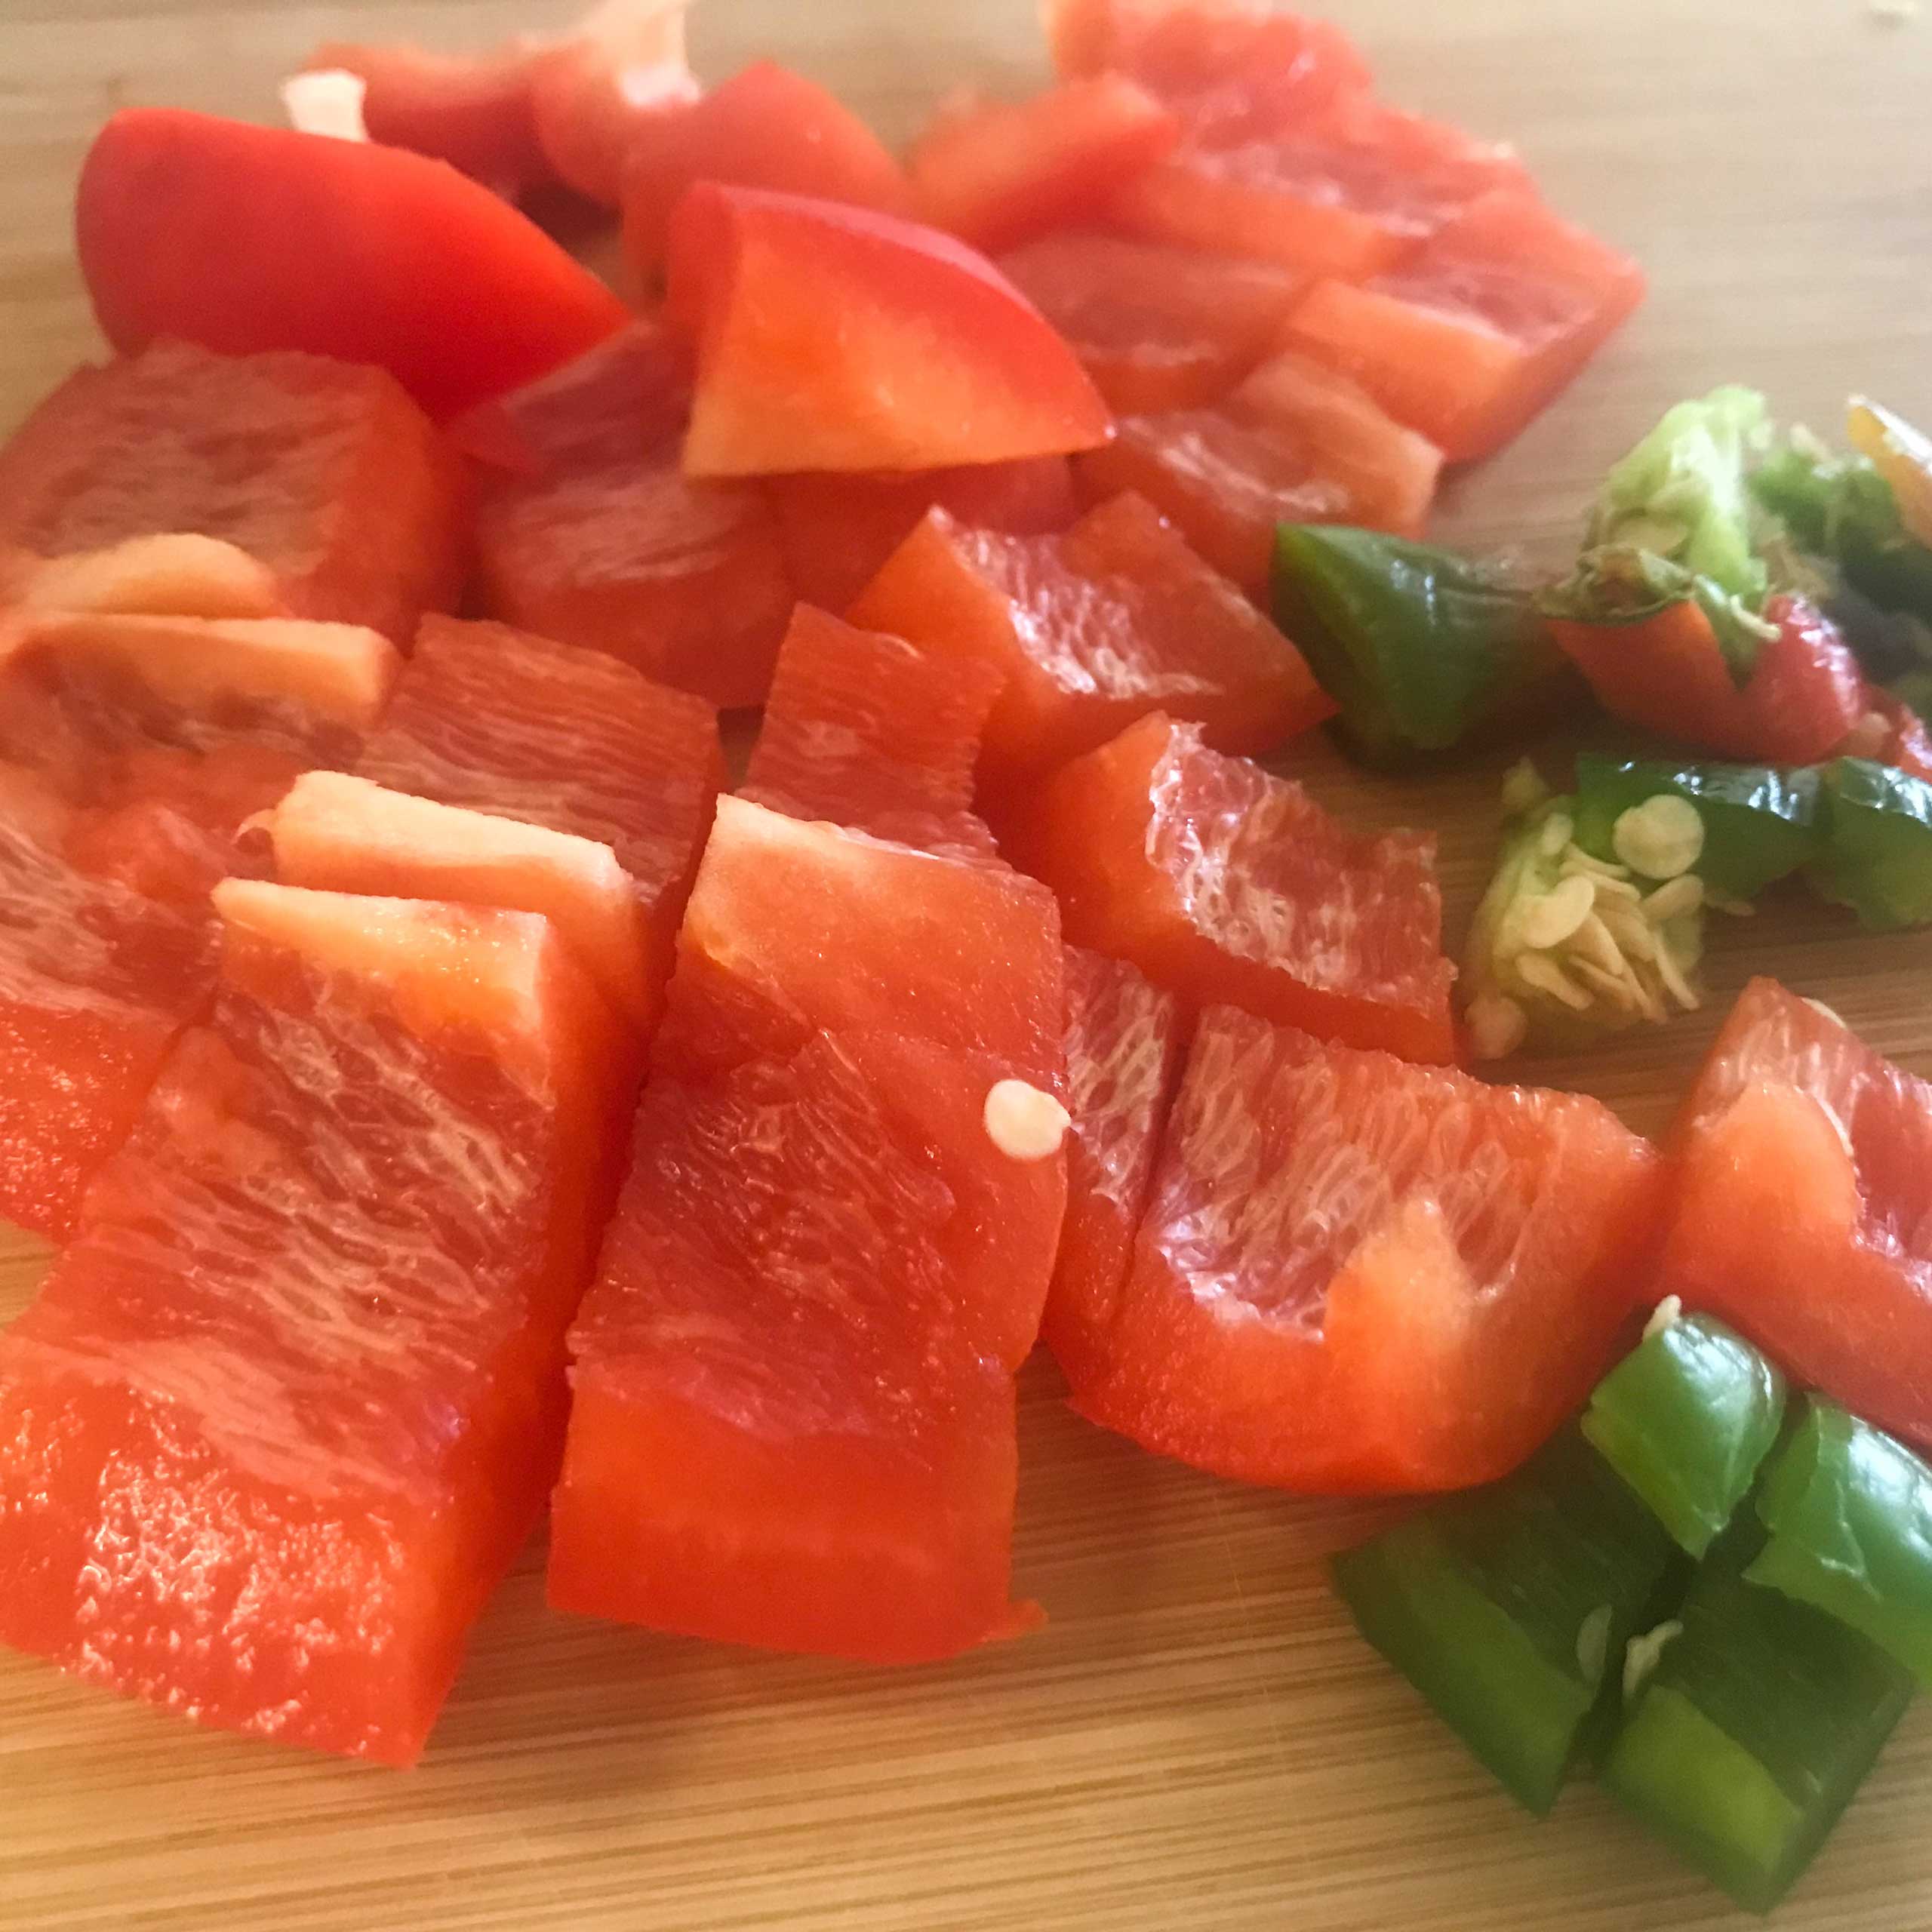 Tomato sliced for three bean hummus | My Curated Tastes